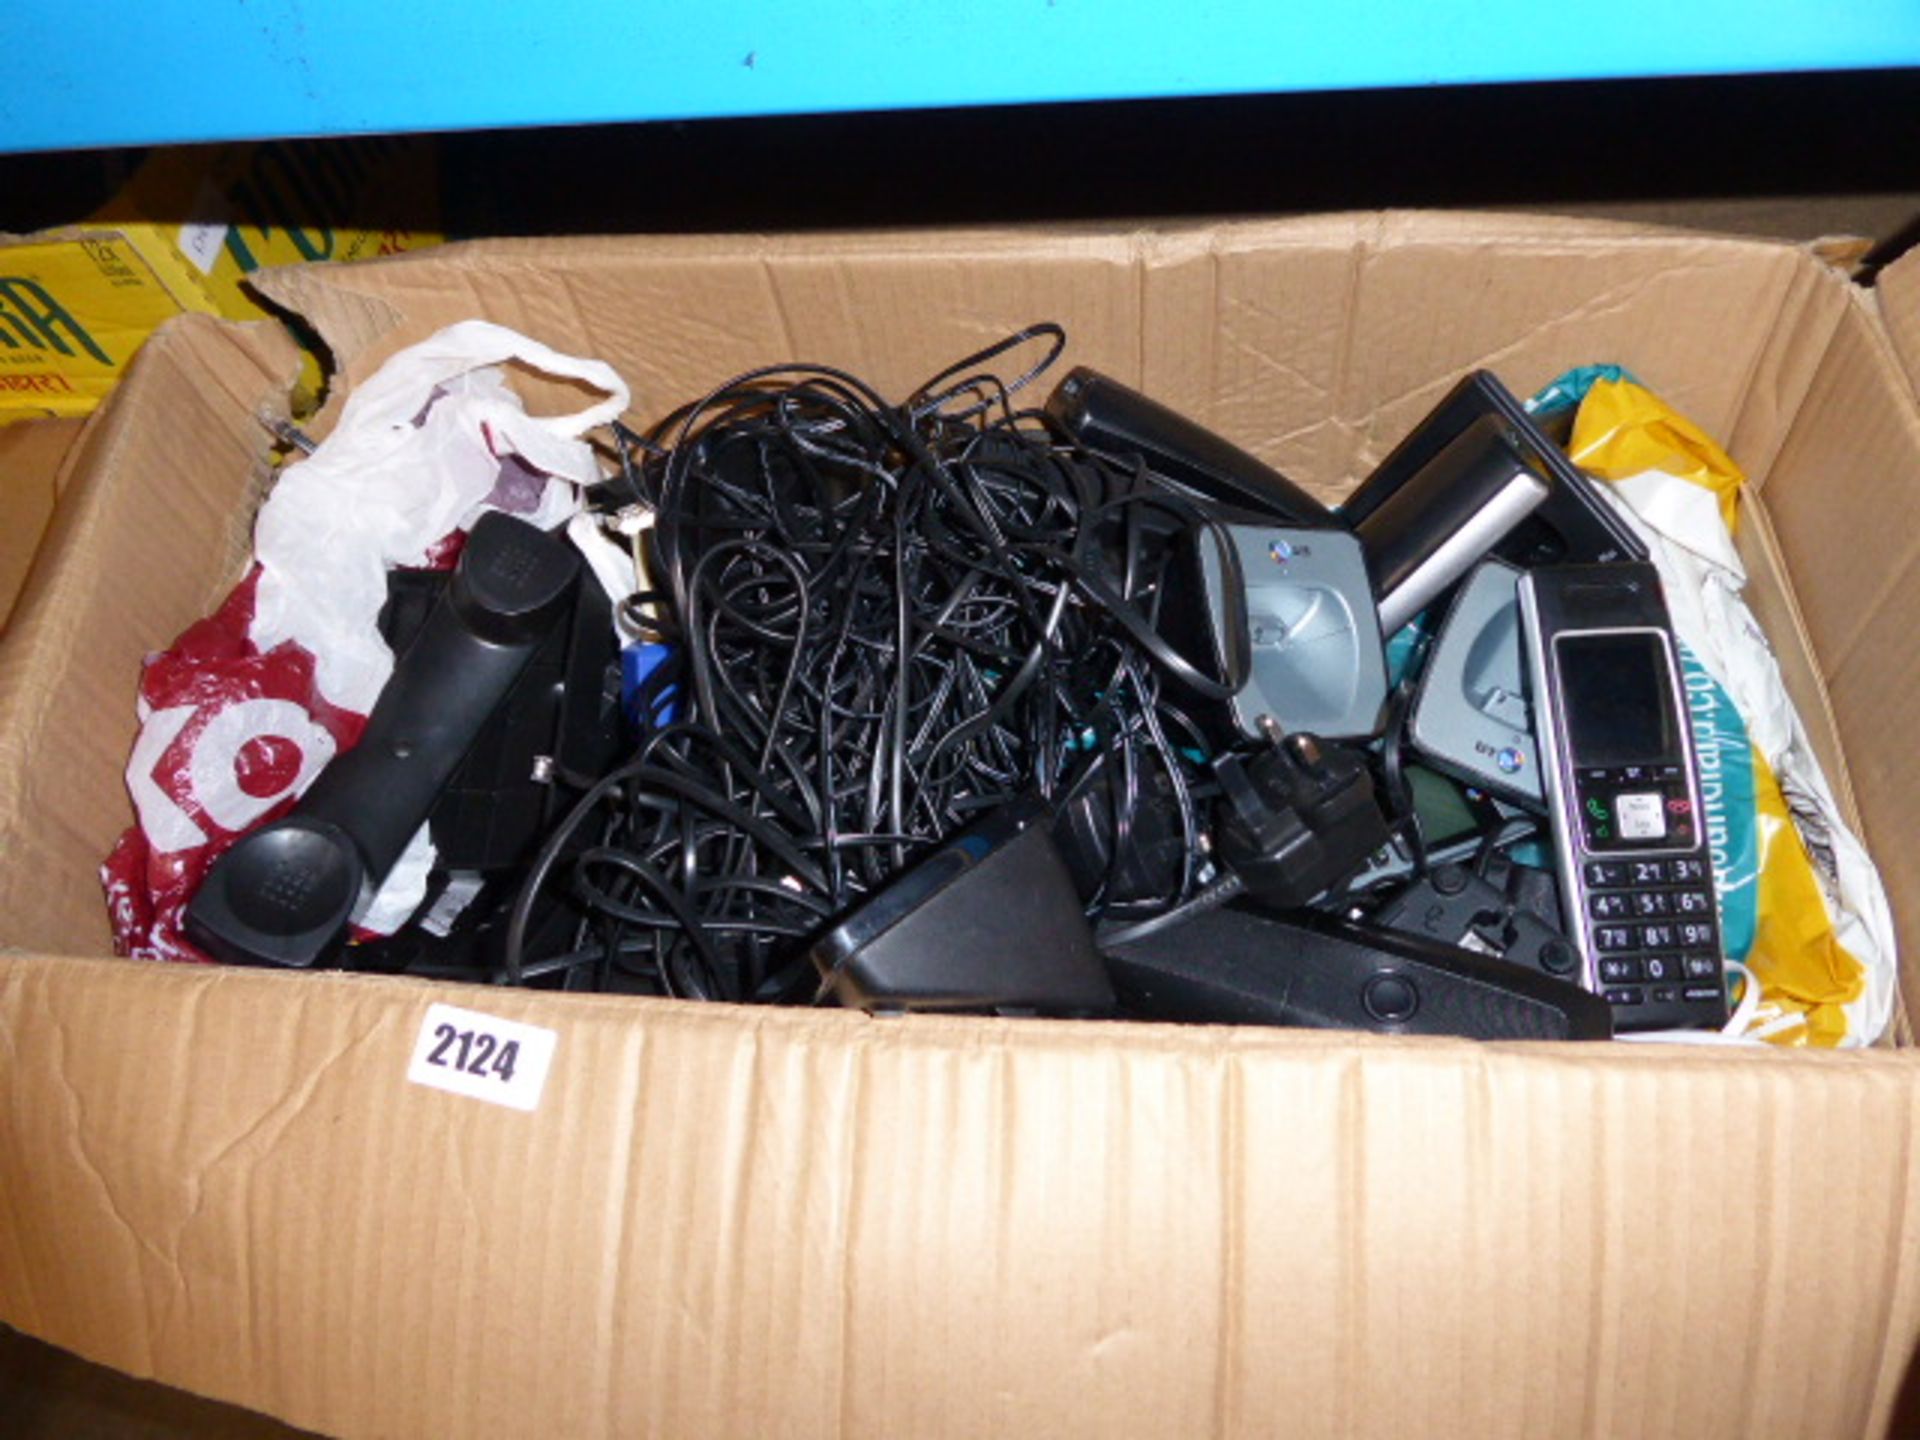 Box of various mobile phone telecoms units by BT and others